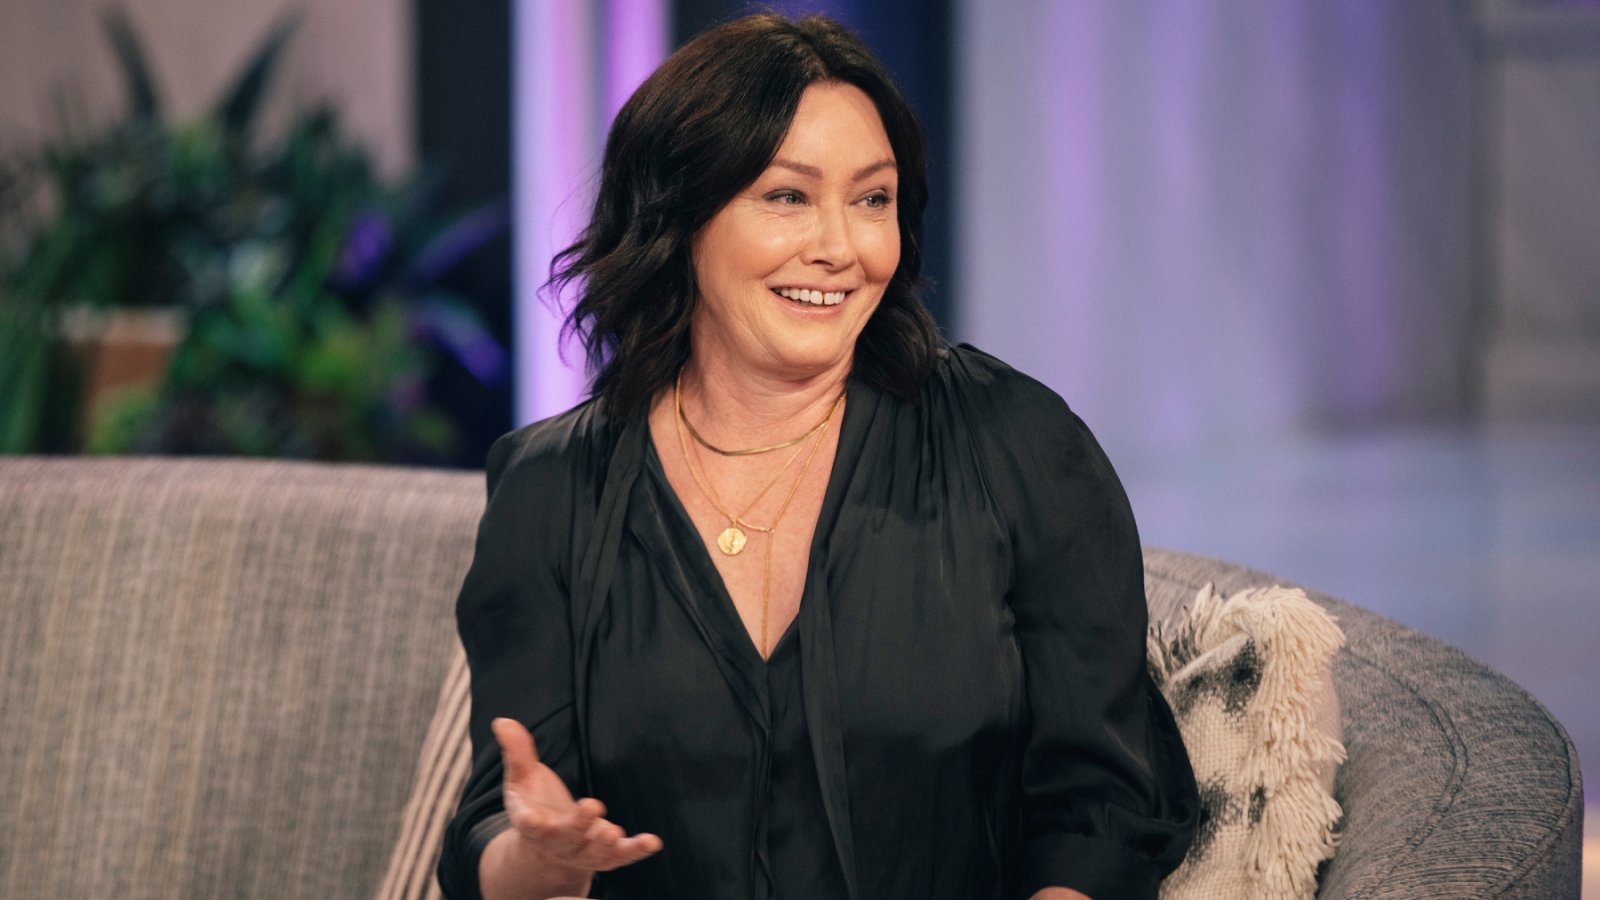 Shannen Doherty Shares Emotional Video Revealing What Cancer Can Look Like - Heartbreaking! 17